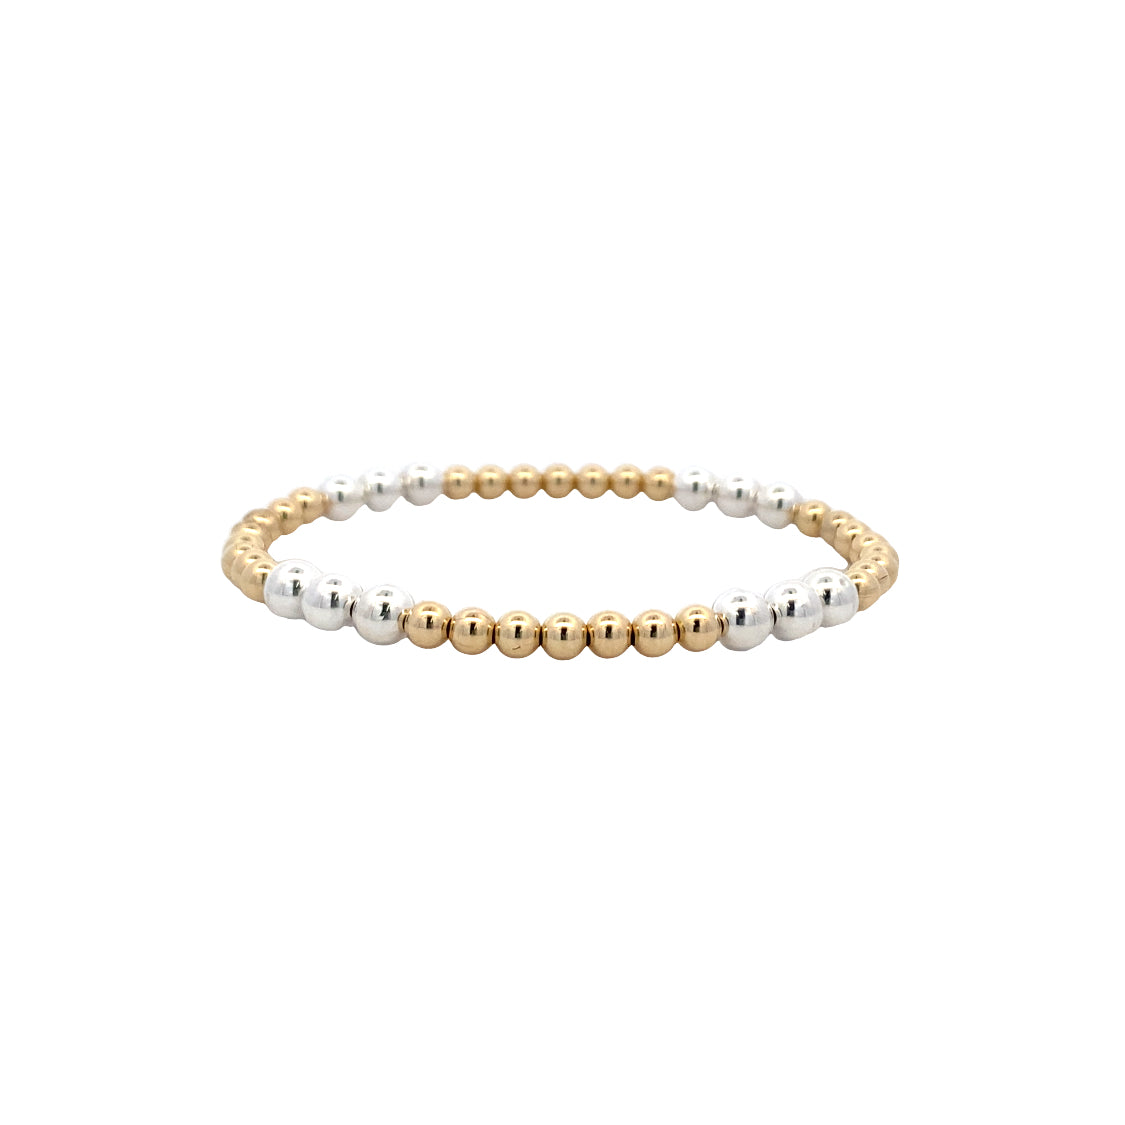 Karen Lazar Stretch 4mm Yellow Gold Filled and 5mm Sterling Silver Beaded Bracelet Size 6.5